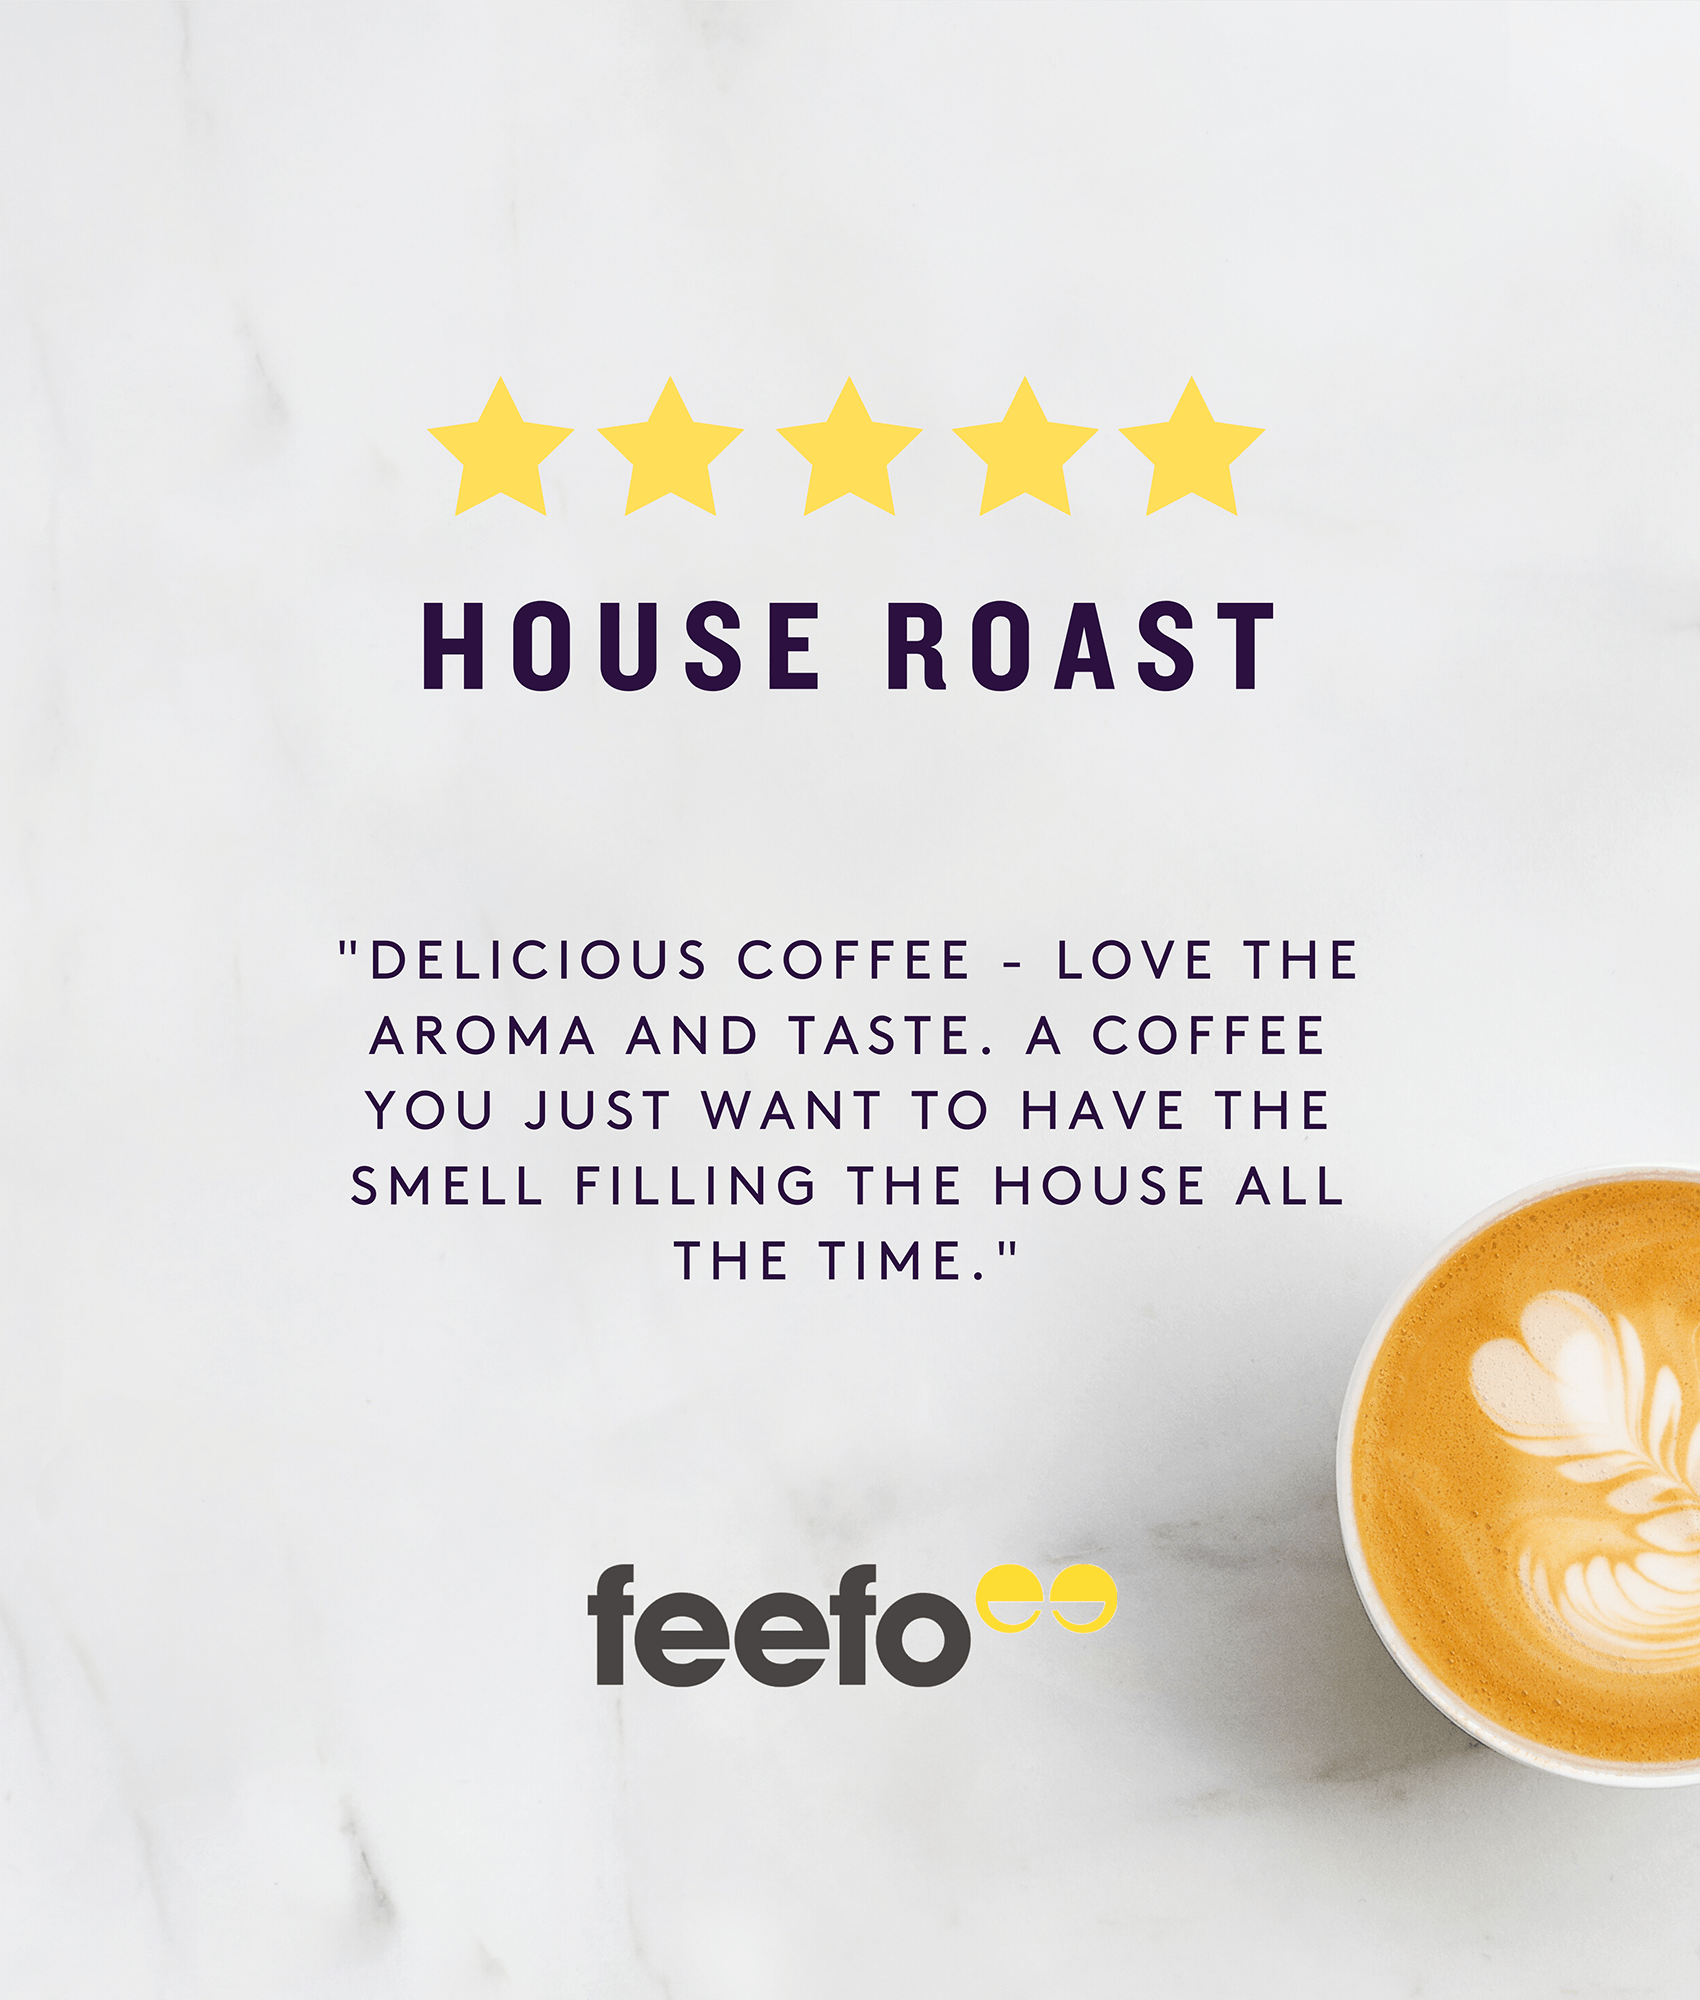 House Roast, 5 star review